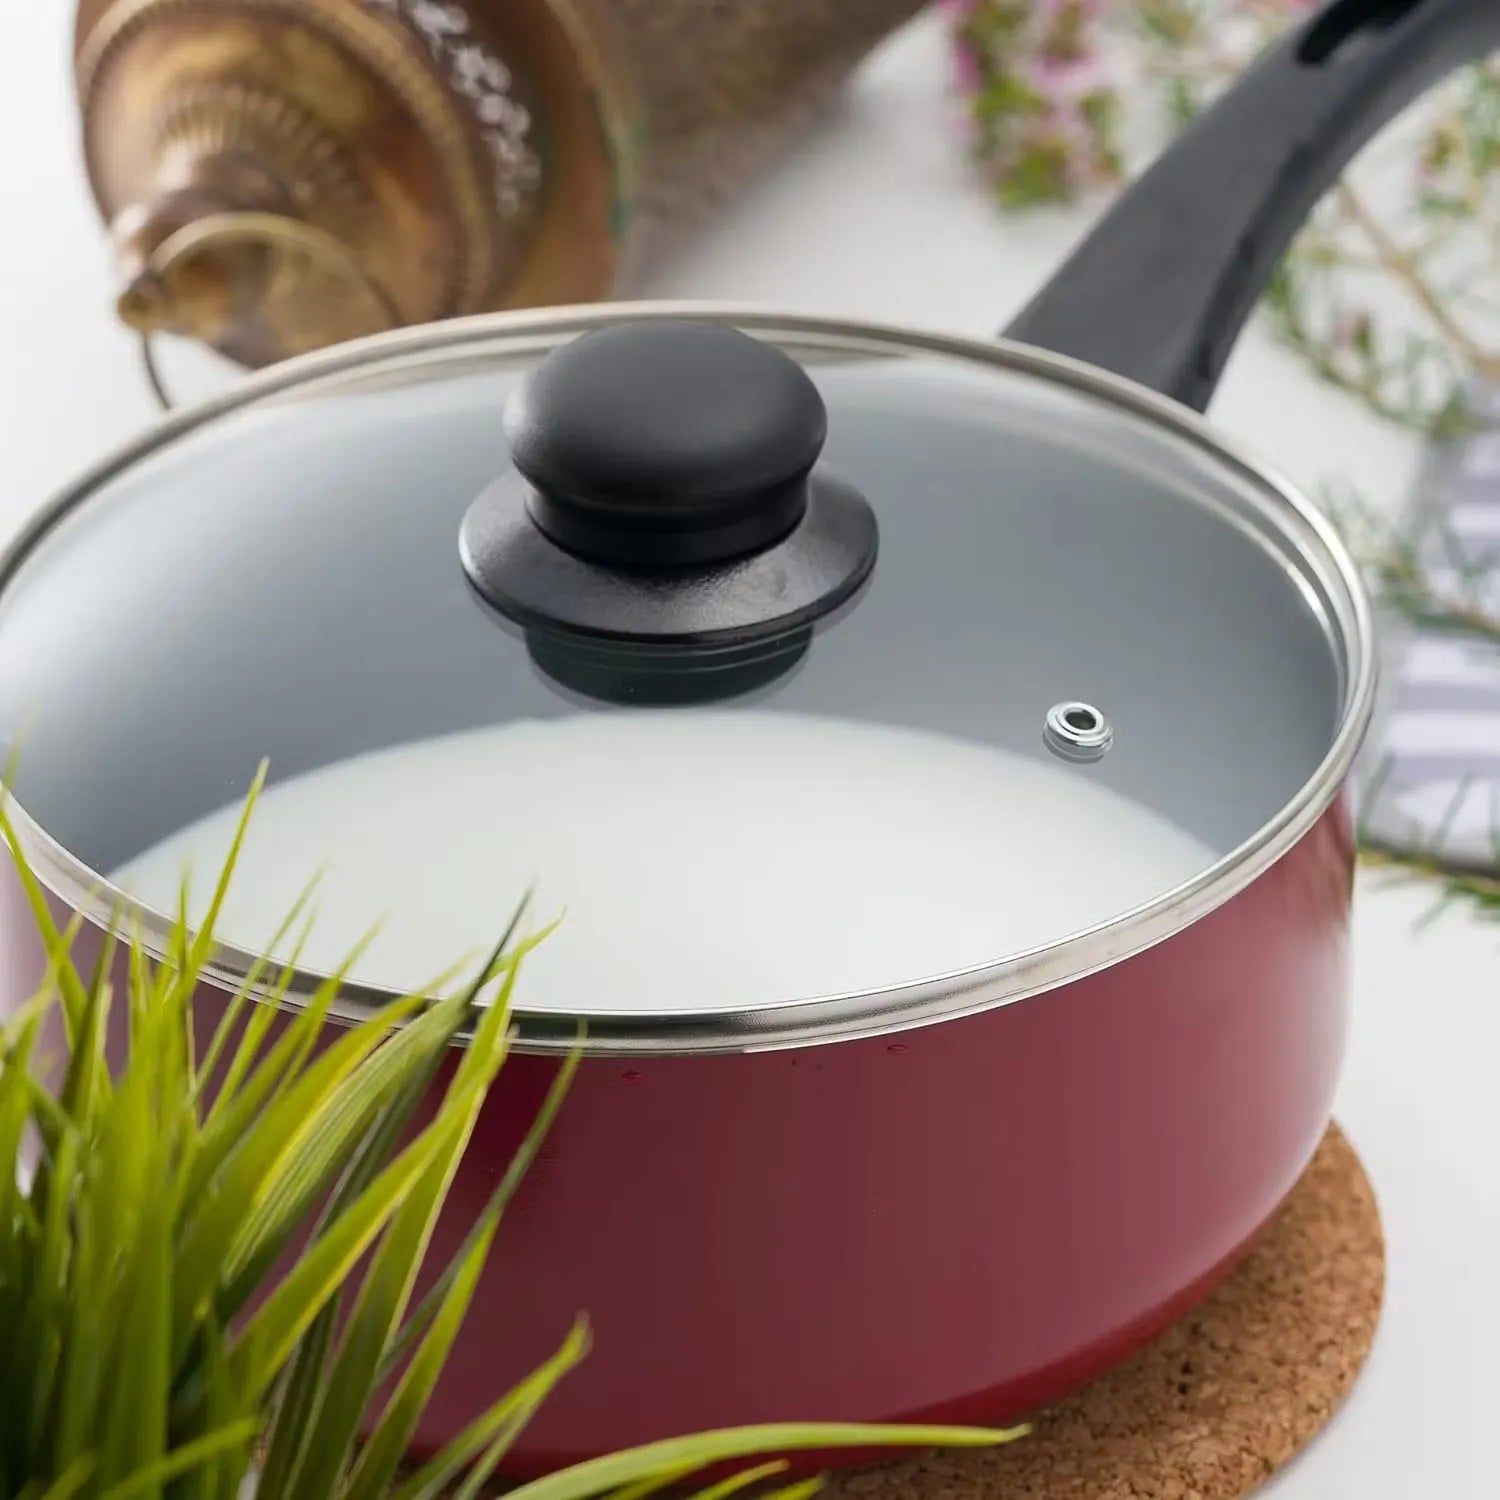 Insiya 20cm non-stick saucepan made from material with features. Suitable for heat sources and dishwasher safe.Discover the versatility of the Insiya 20cm saucepan, ideal for everyday tasks like sauces, soups, and more. Embrace effortless cooking today!